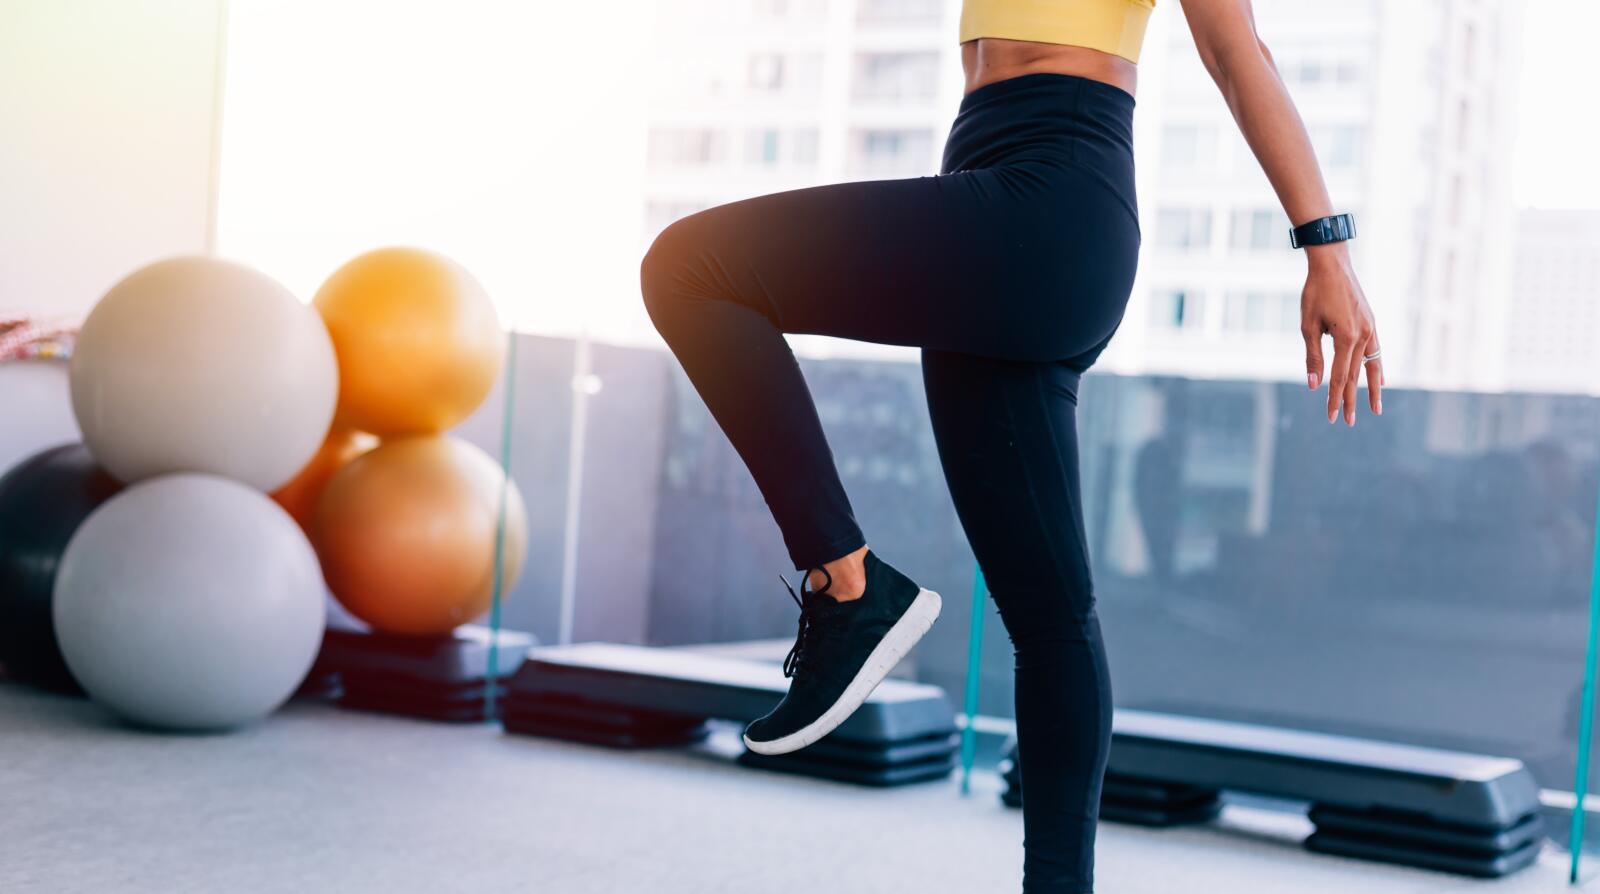 Best Exercises for Legs | At-Home Exercises to Strengthen Legs